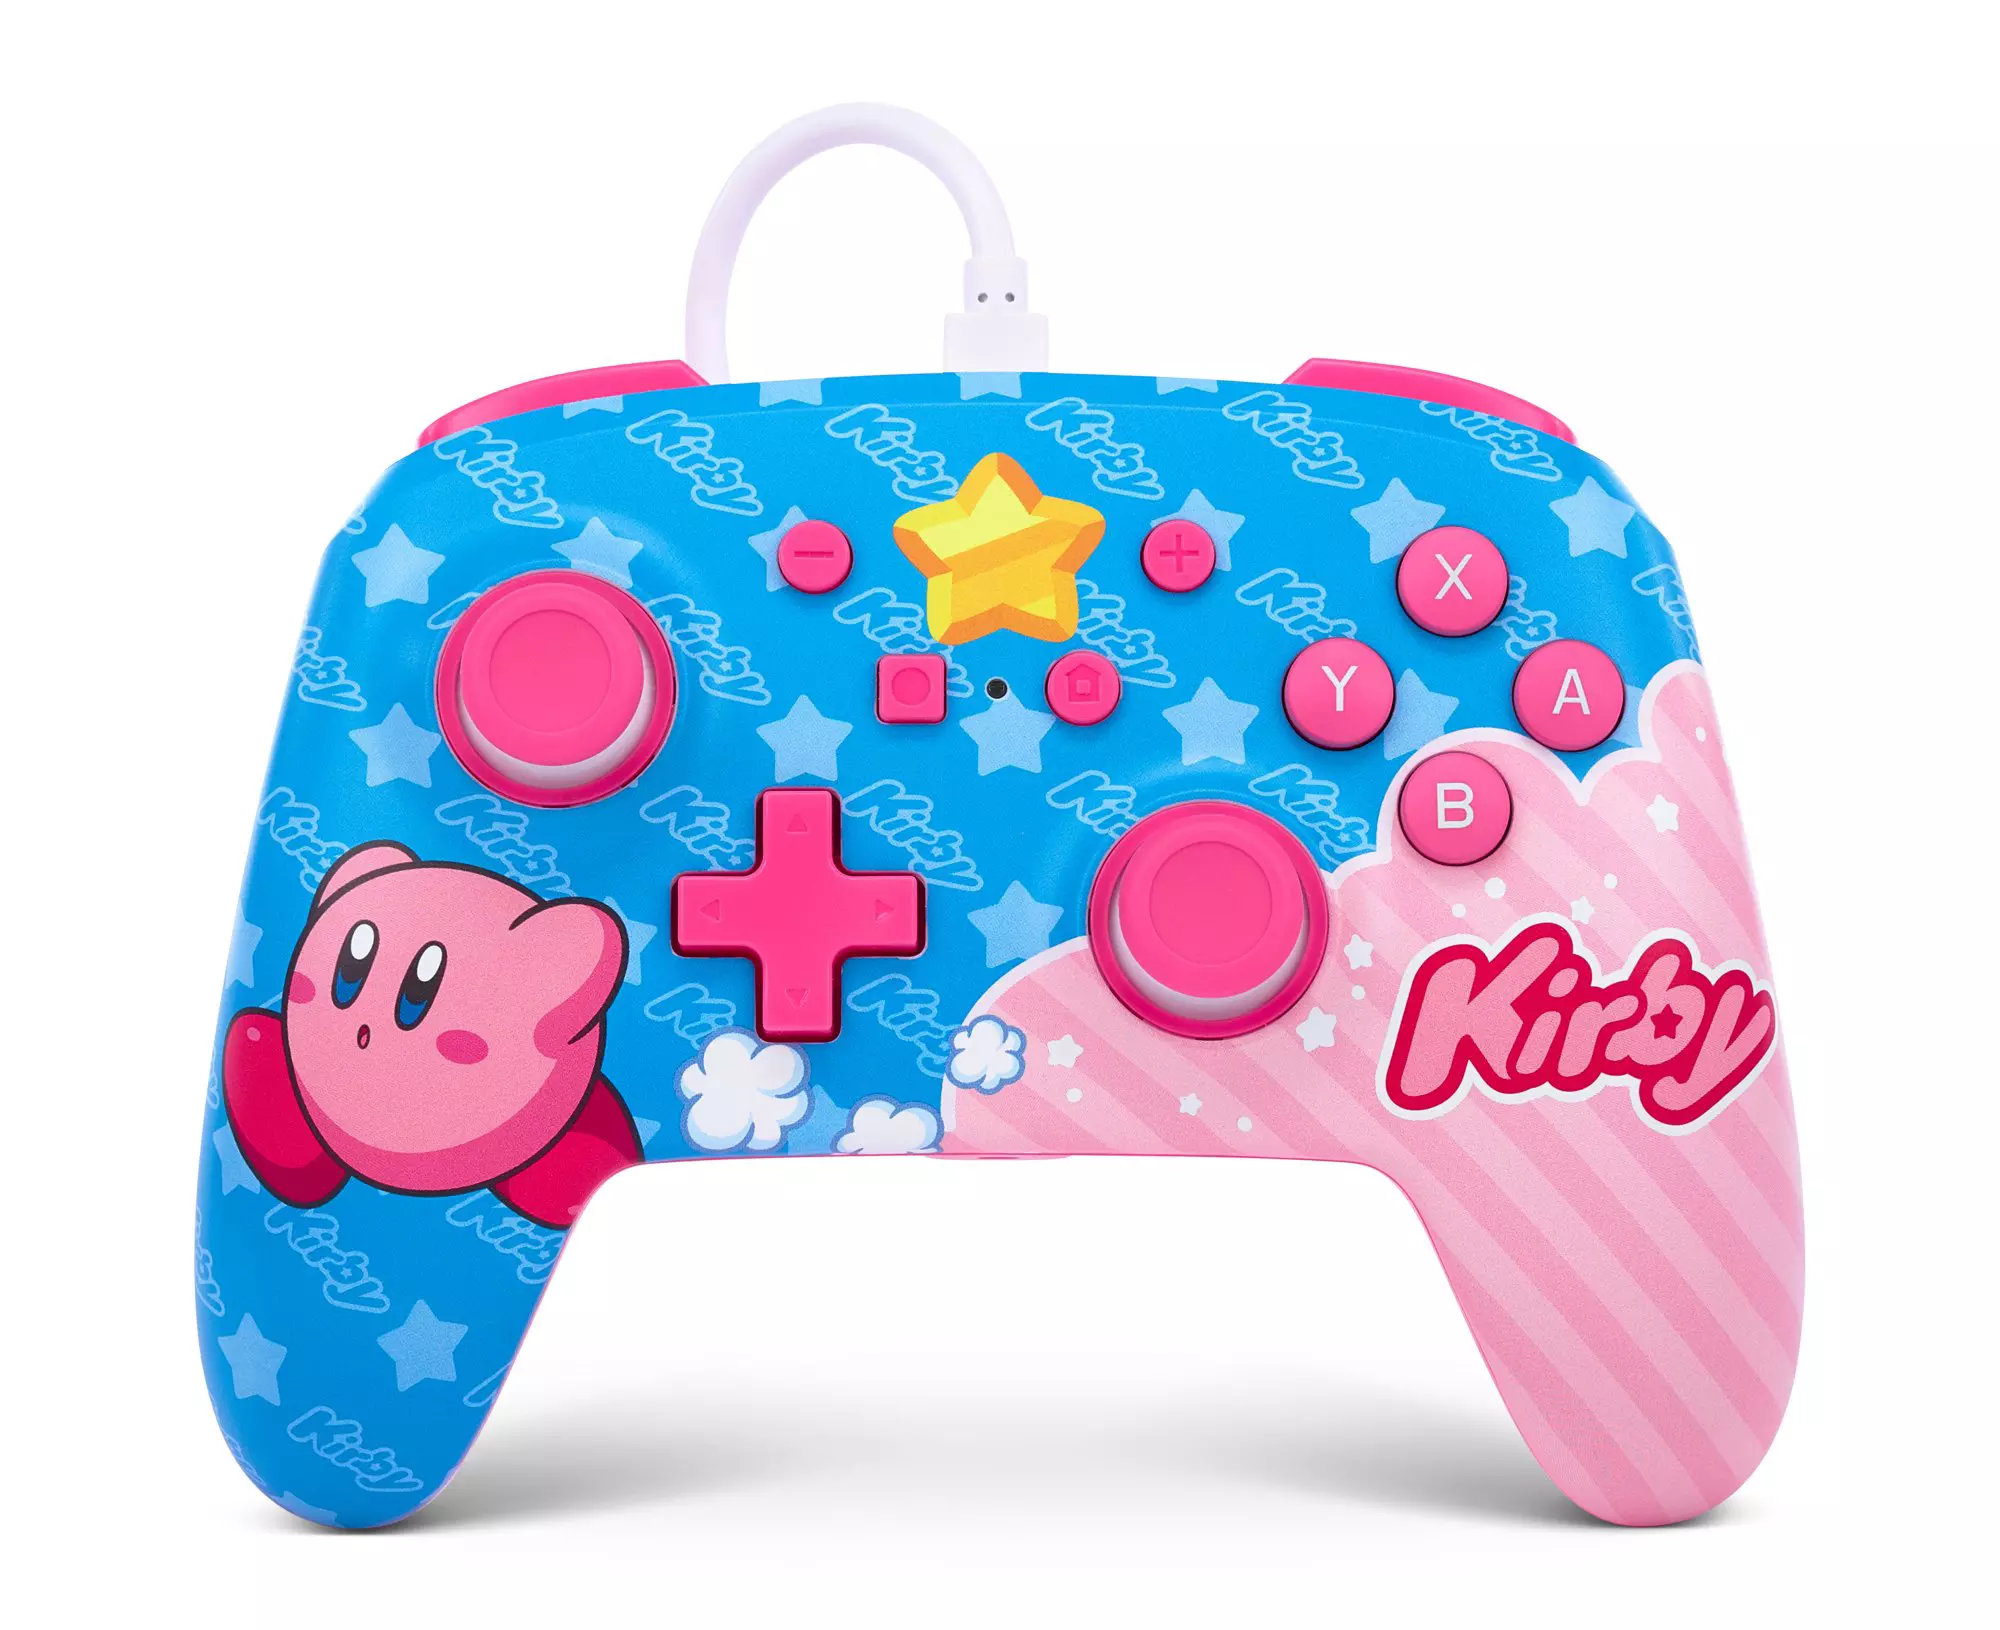 Powera Nsw Enh Wired Controller Kirby